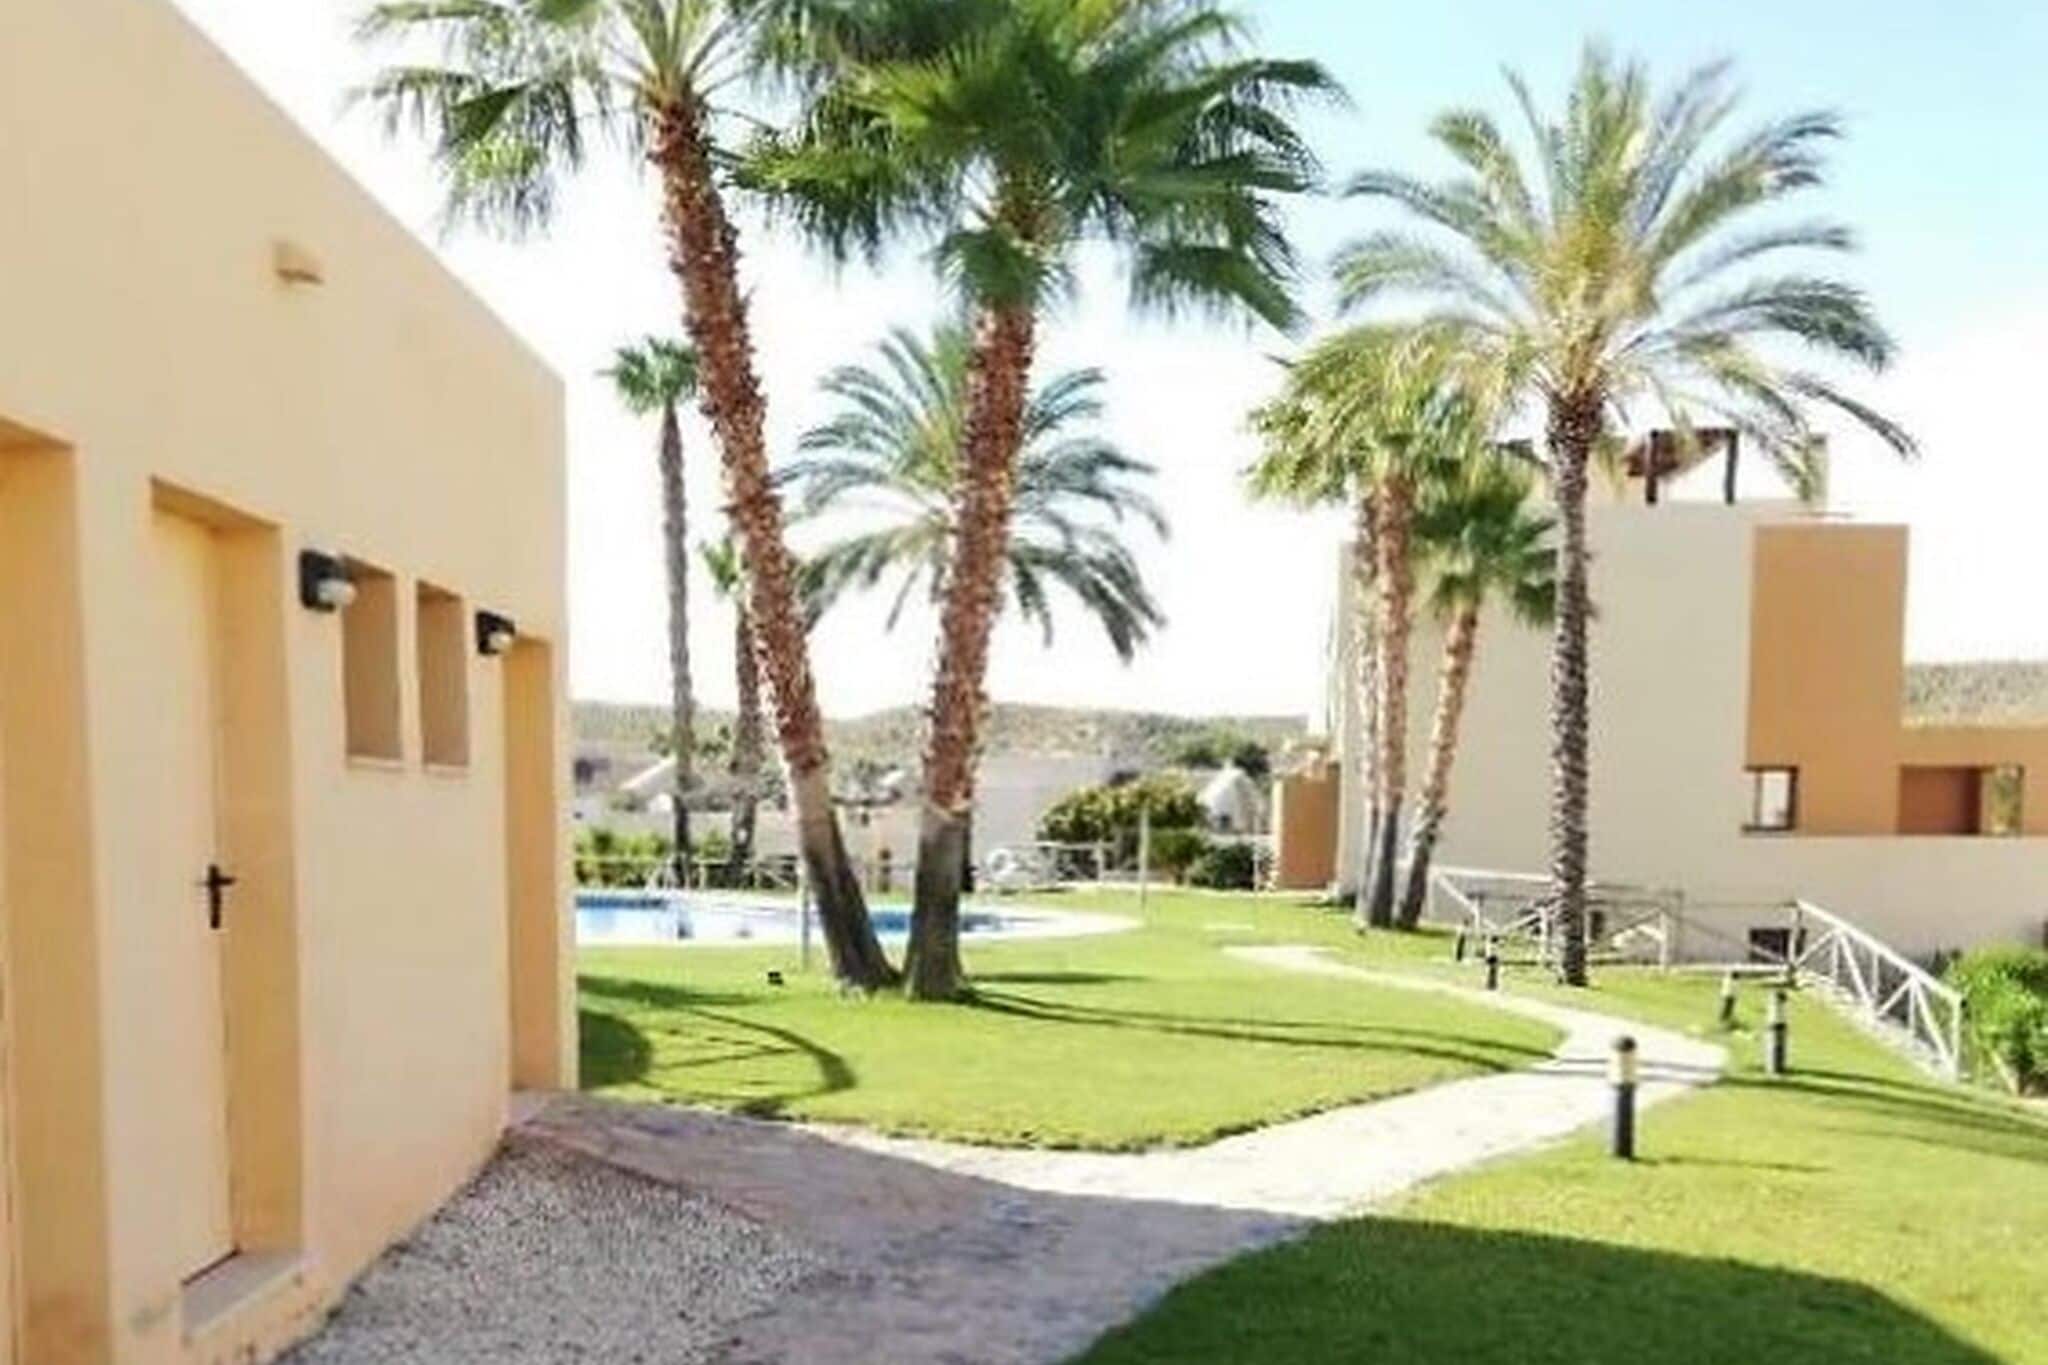 Pleasant holiday home in Vera Playa with private garden